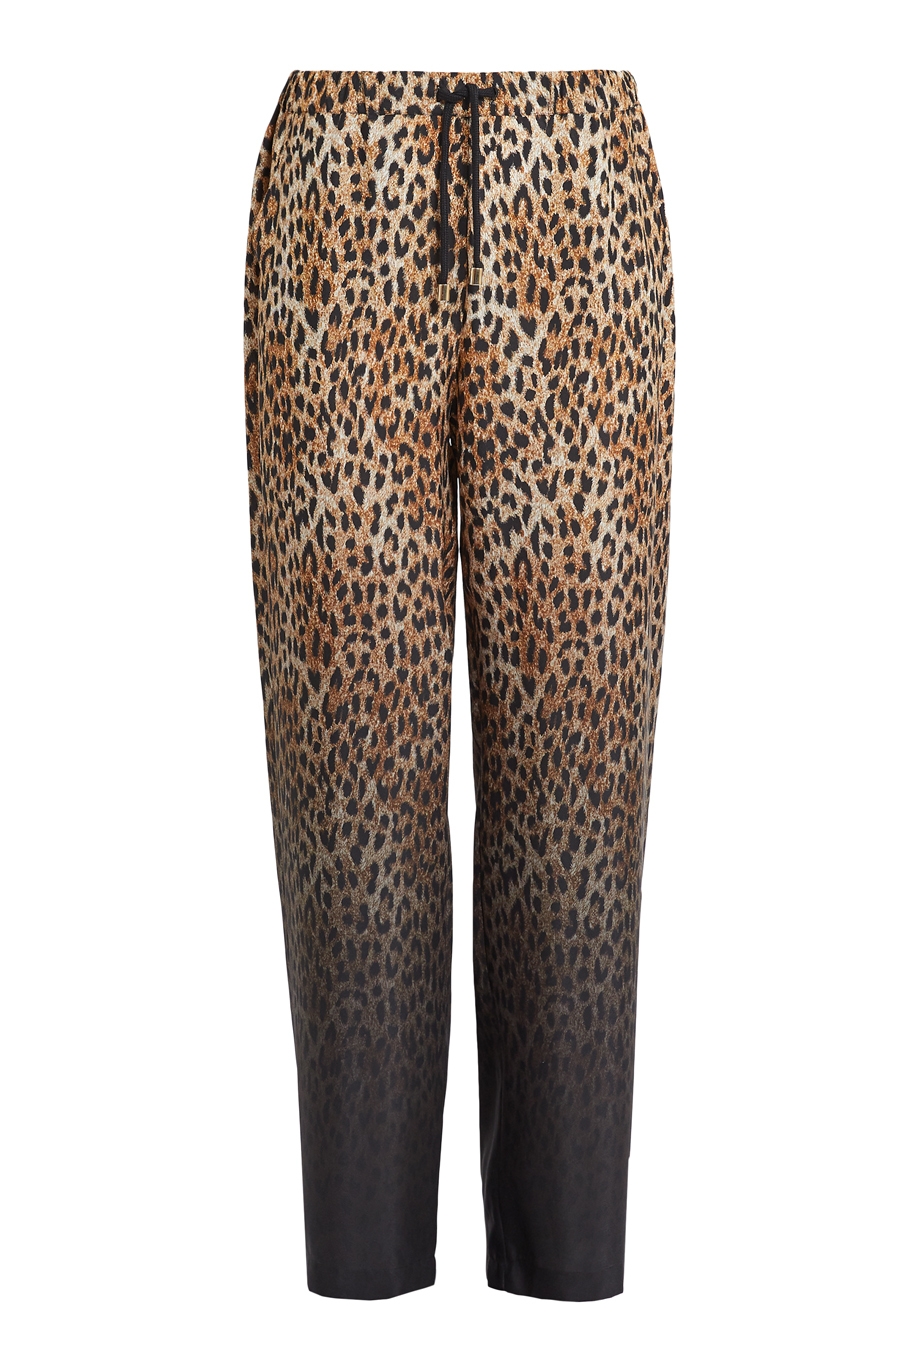 Buy Animal Print Texture Wide Leg Trousers from Next Austria